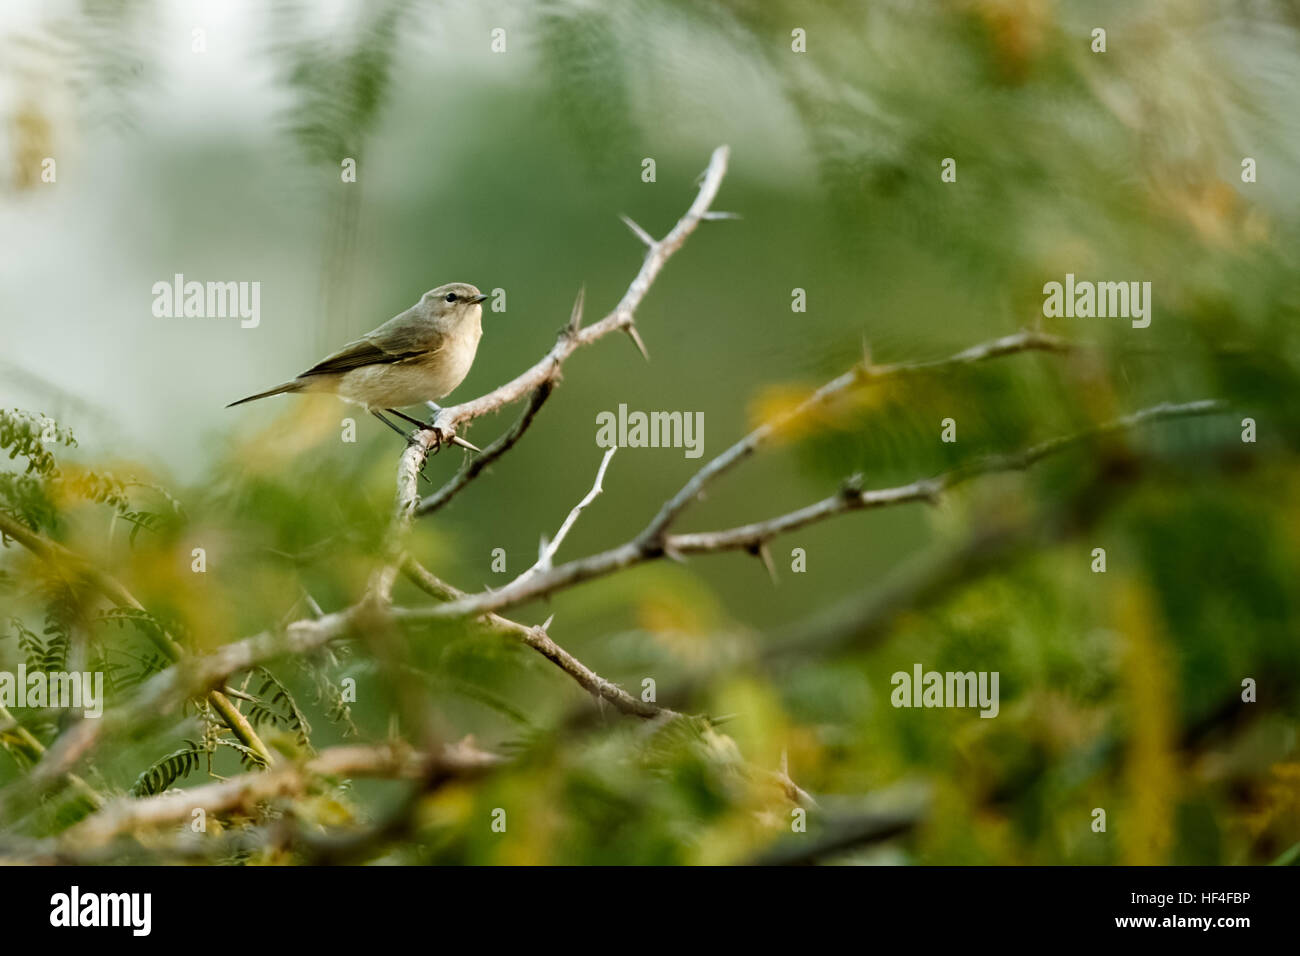 A profile portrait of a Warbler perched on branches Stock Photo